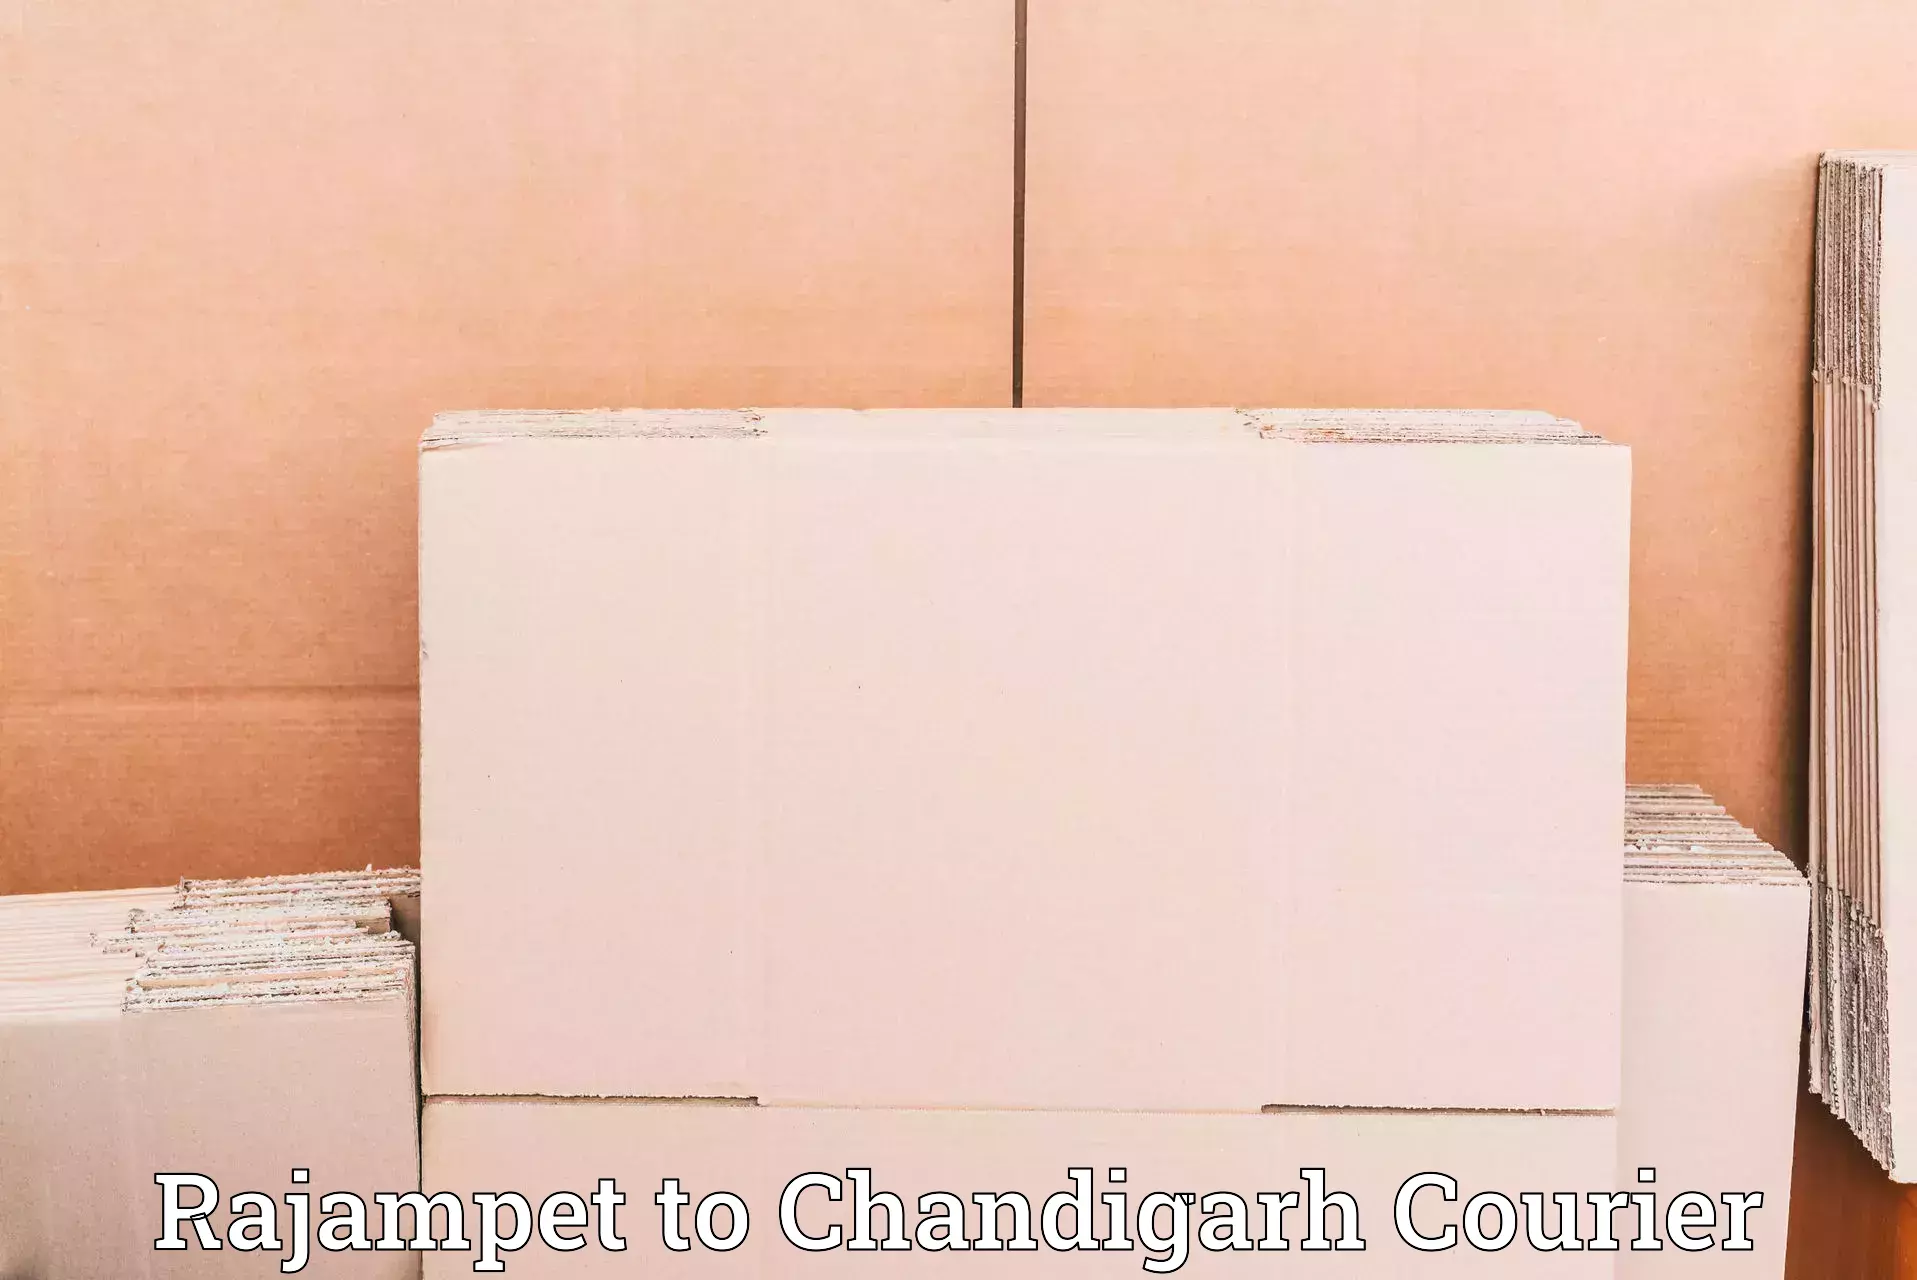 Courier service innovation Rajampet to Chandigarh